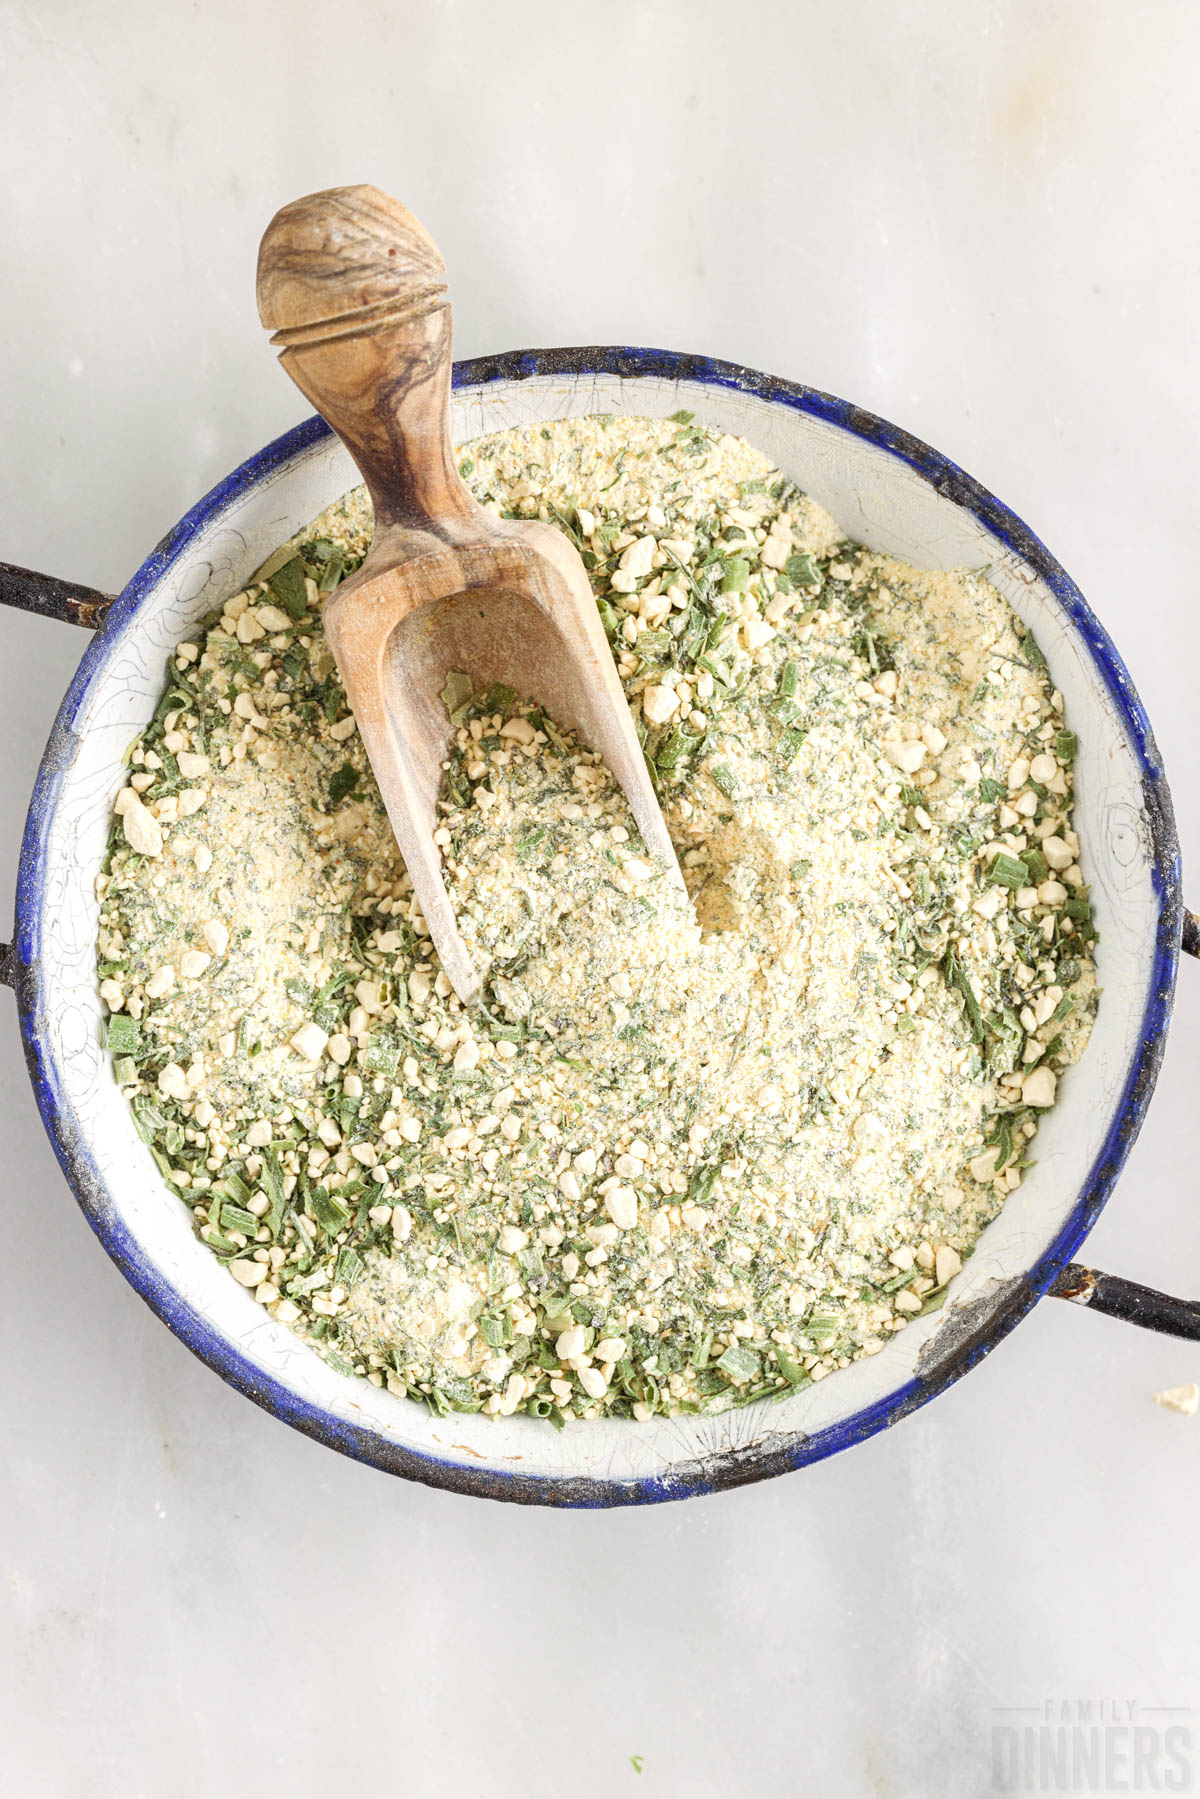 mixed up ranch seasoning in a bowl with a wooden spoon